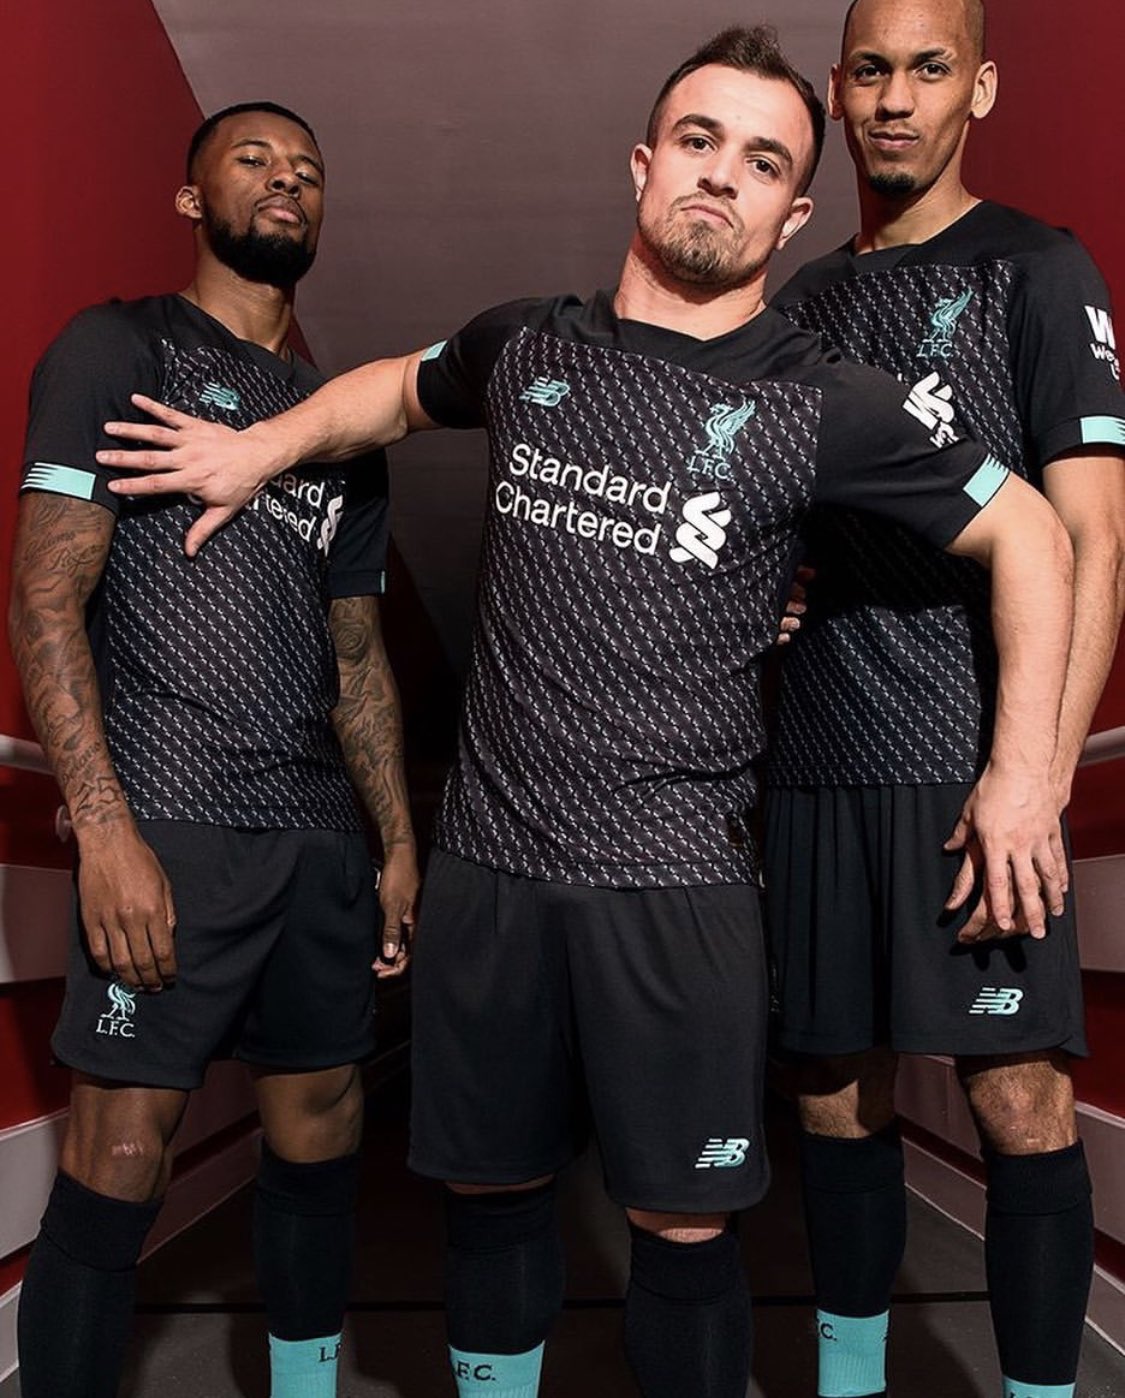 jersey liverpool 2019 3rd